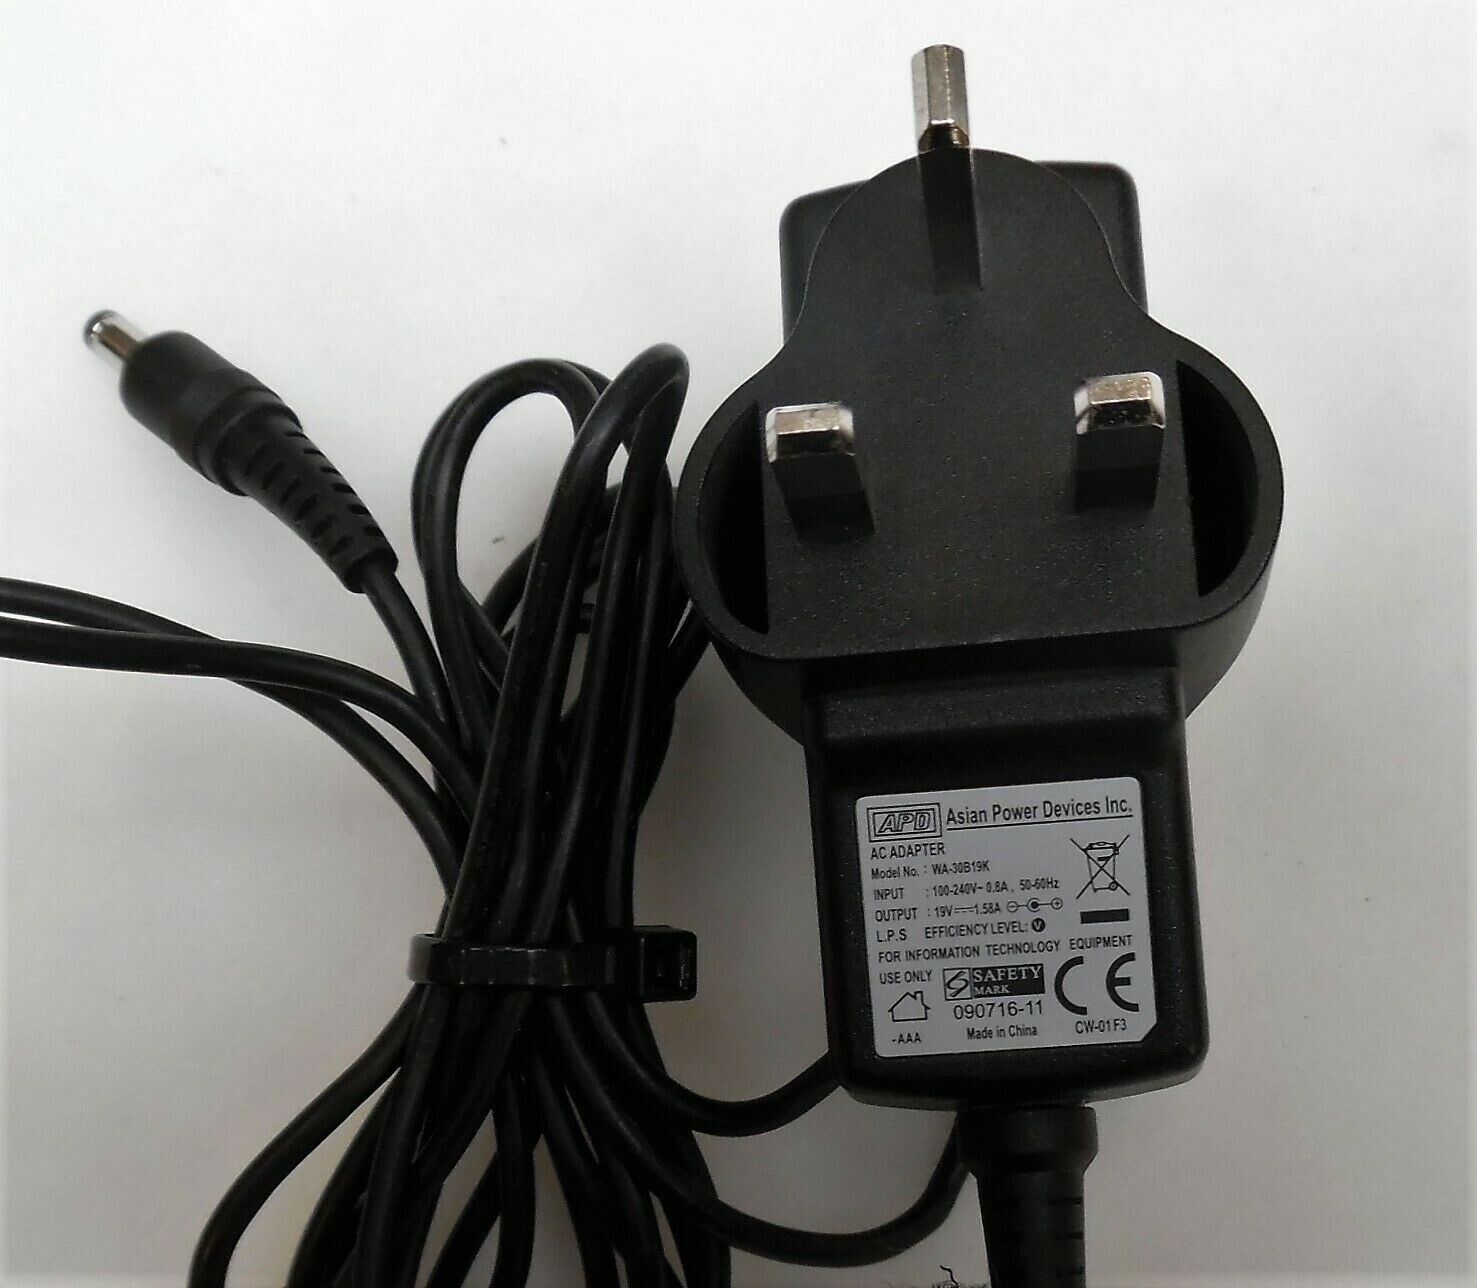 New Asian Power Device WA-30B19K 19V 1.58A Power Supply AC DC Adapter - Click Image to Close